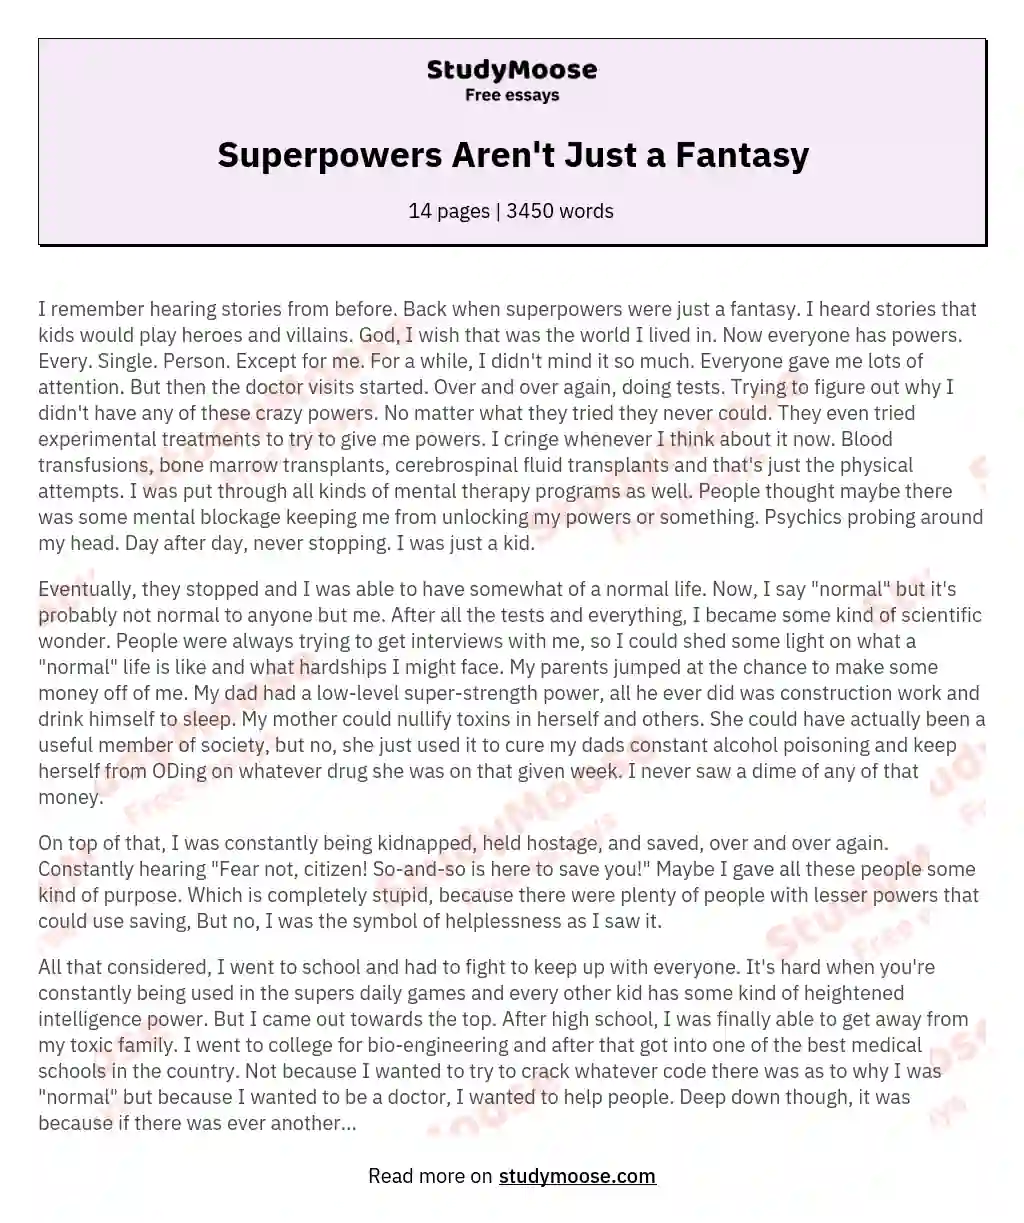 Superpowers Aren't Just a Fantasy essay